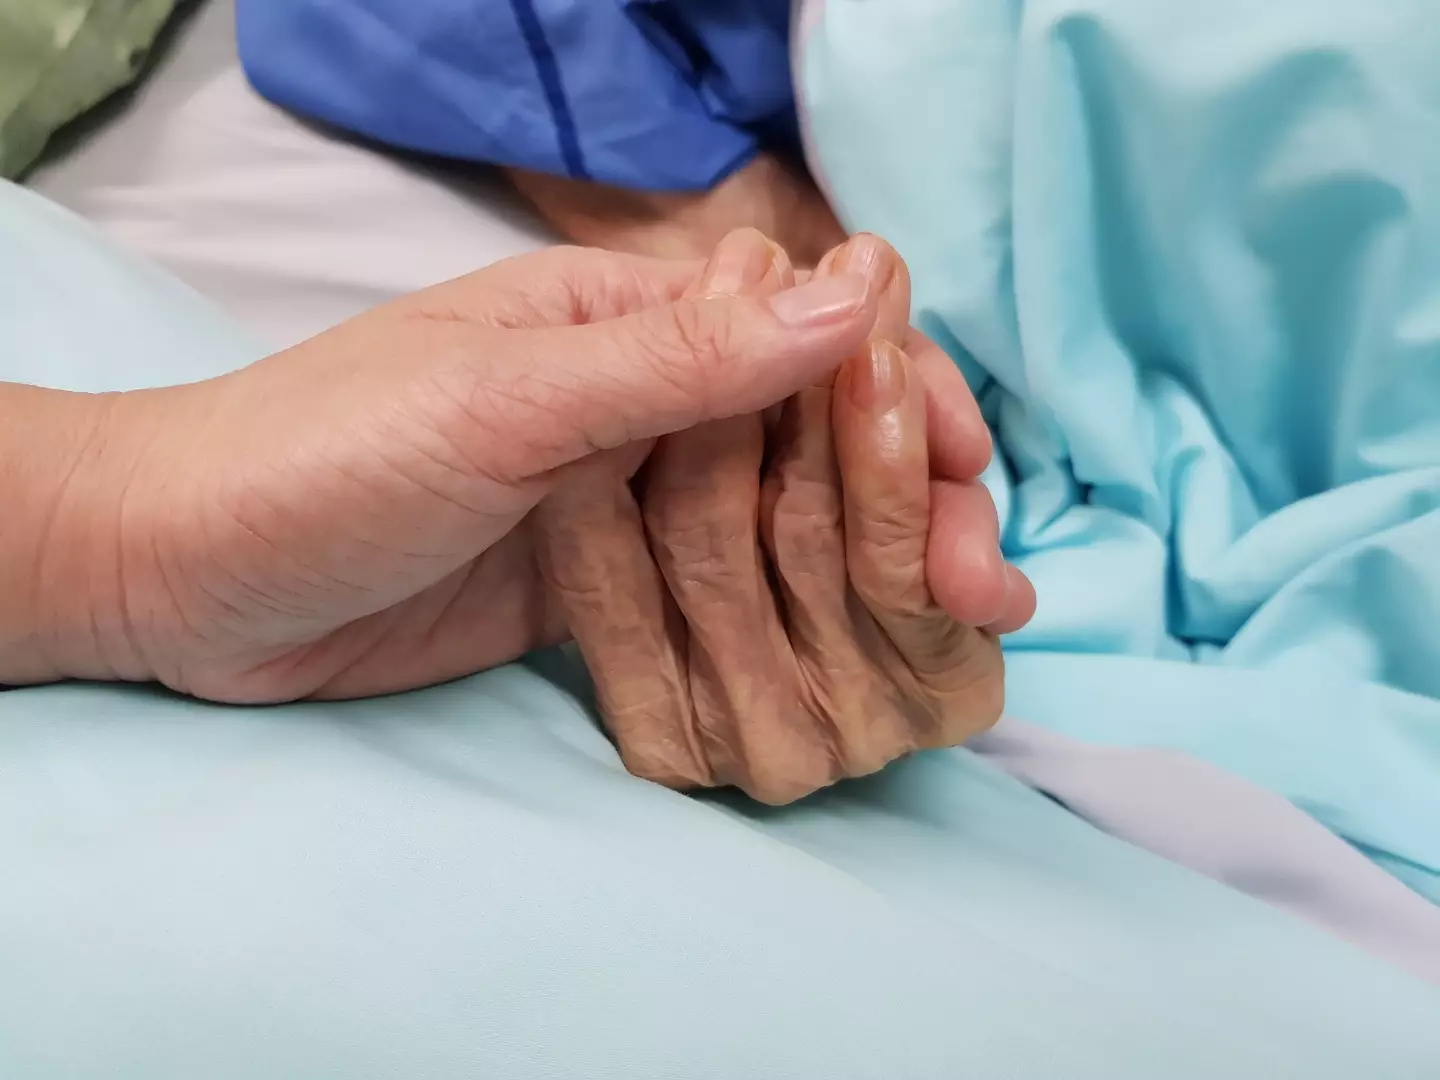 The hospice nurse has revealed the chilling thing that happens before someone passes away.